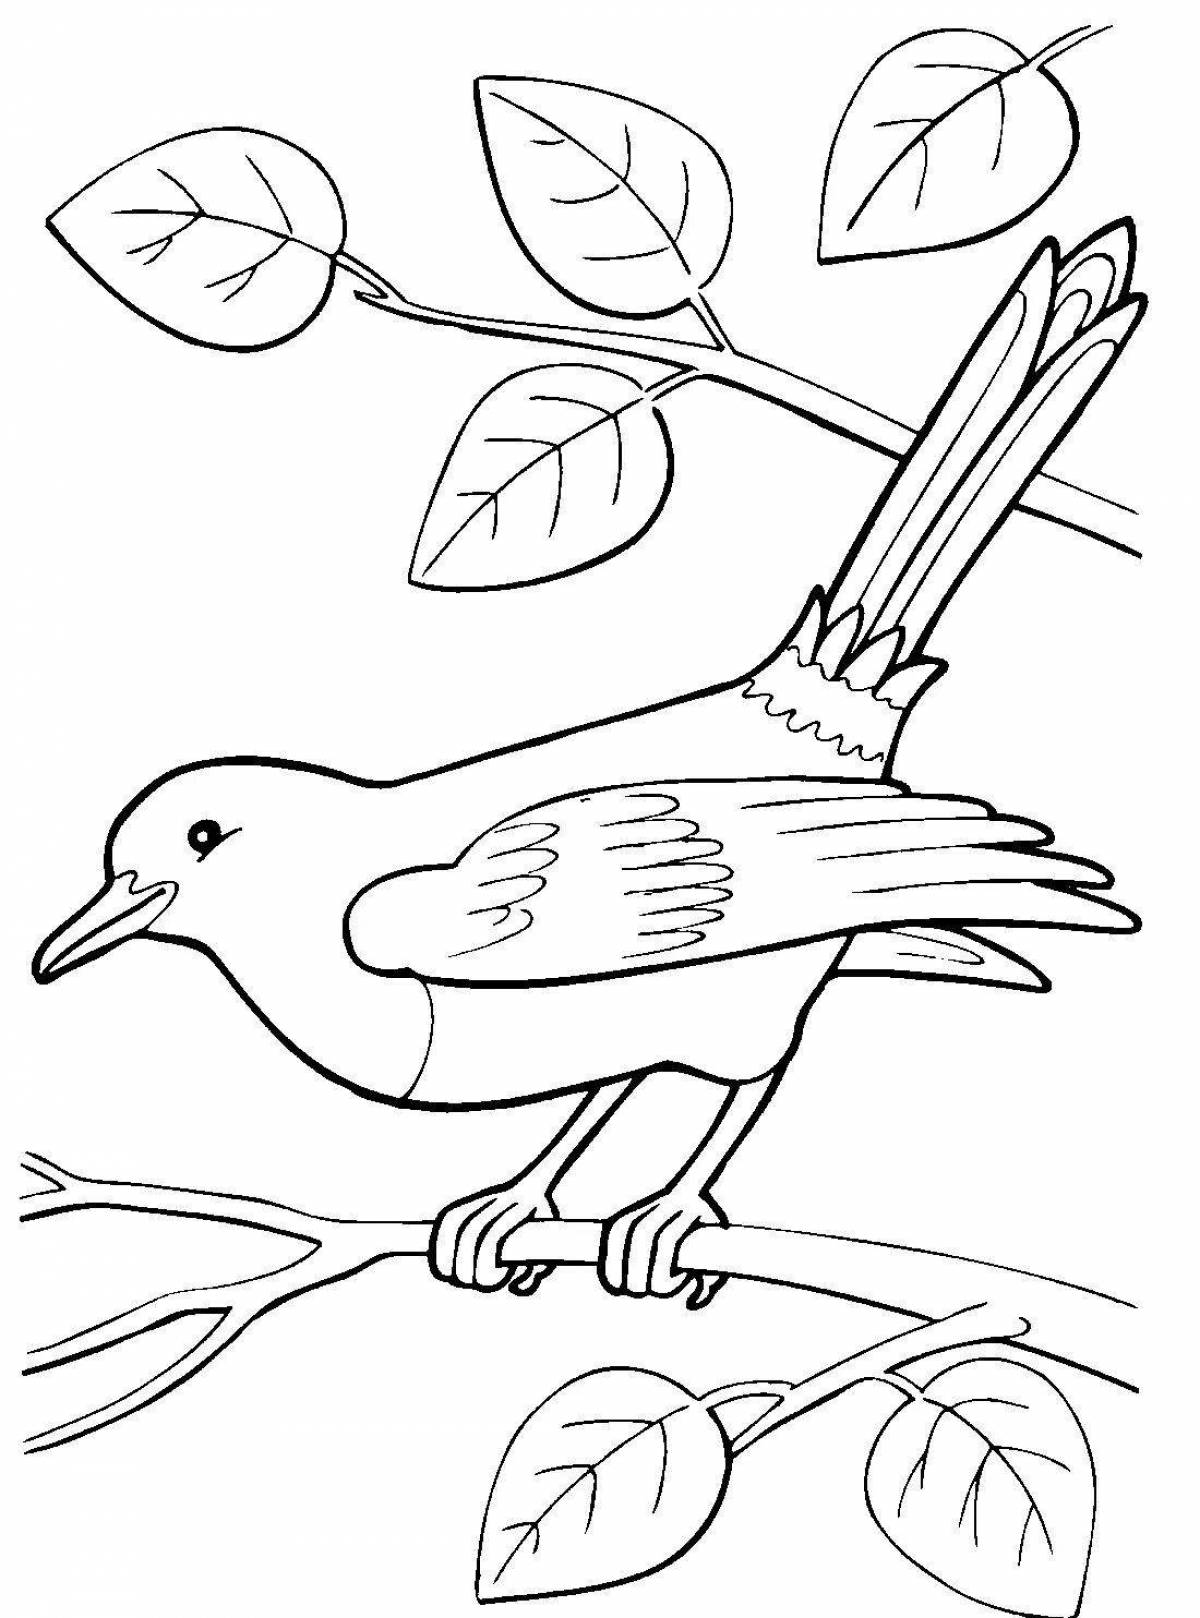 Awesome magpie coloring page